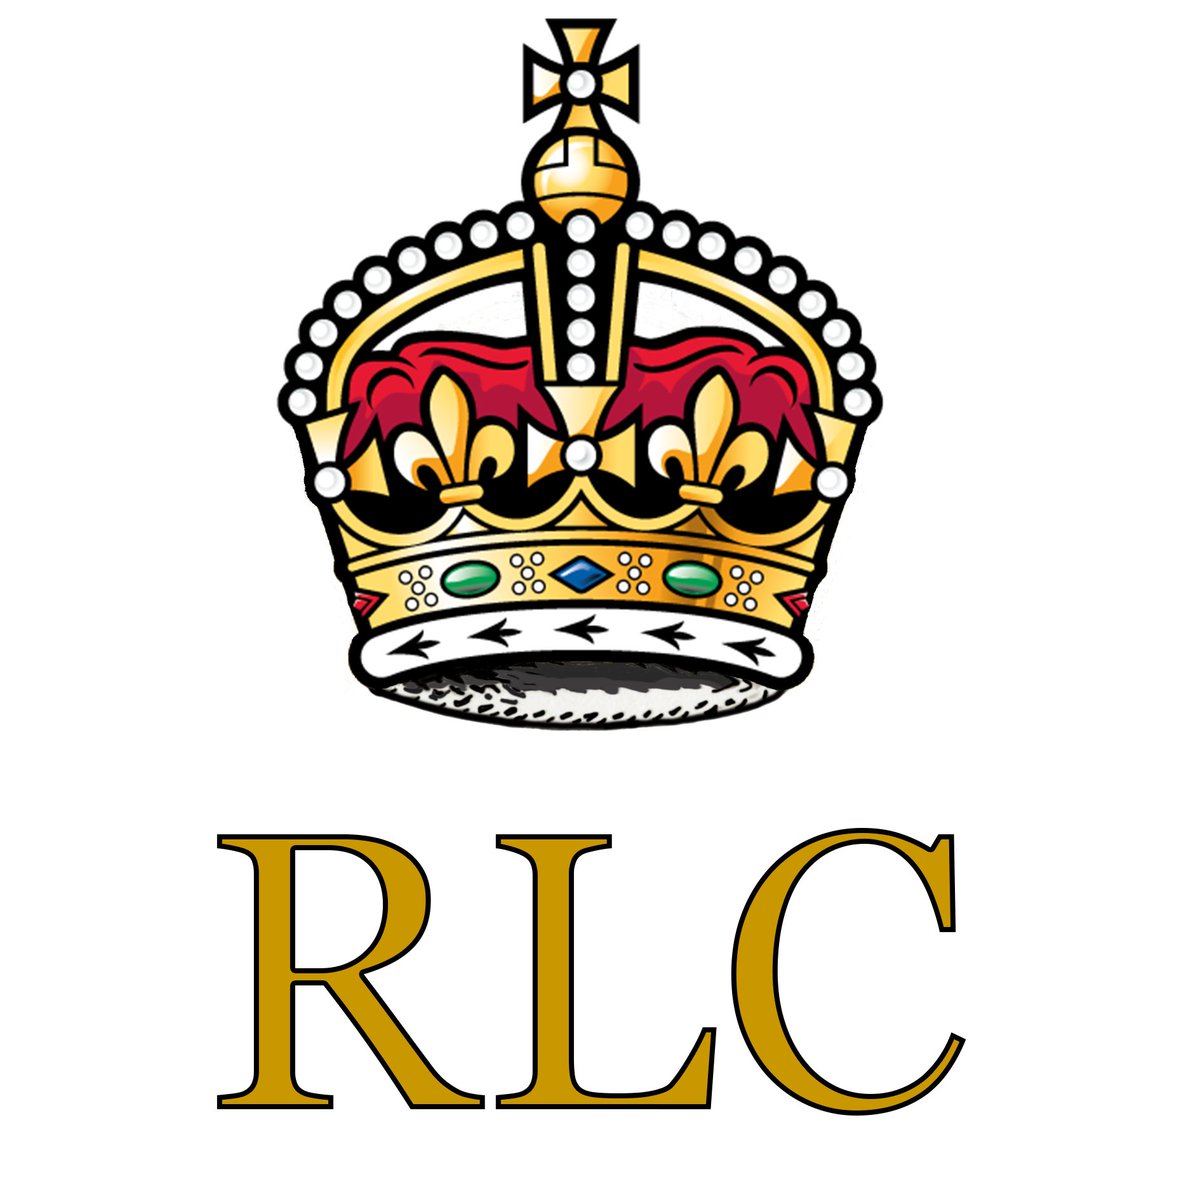 In anticipation of the RLC Annual AGM, We would like to give you the opportunity to see The RLC Association Trust Impact Report 2022 and how The Corps Charity has supported the Corps family over the last 12 months. Please follow the link to the report - royallogisticcorps.co.uk/wp-content/upl…